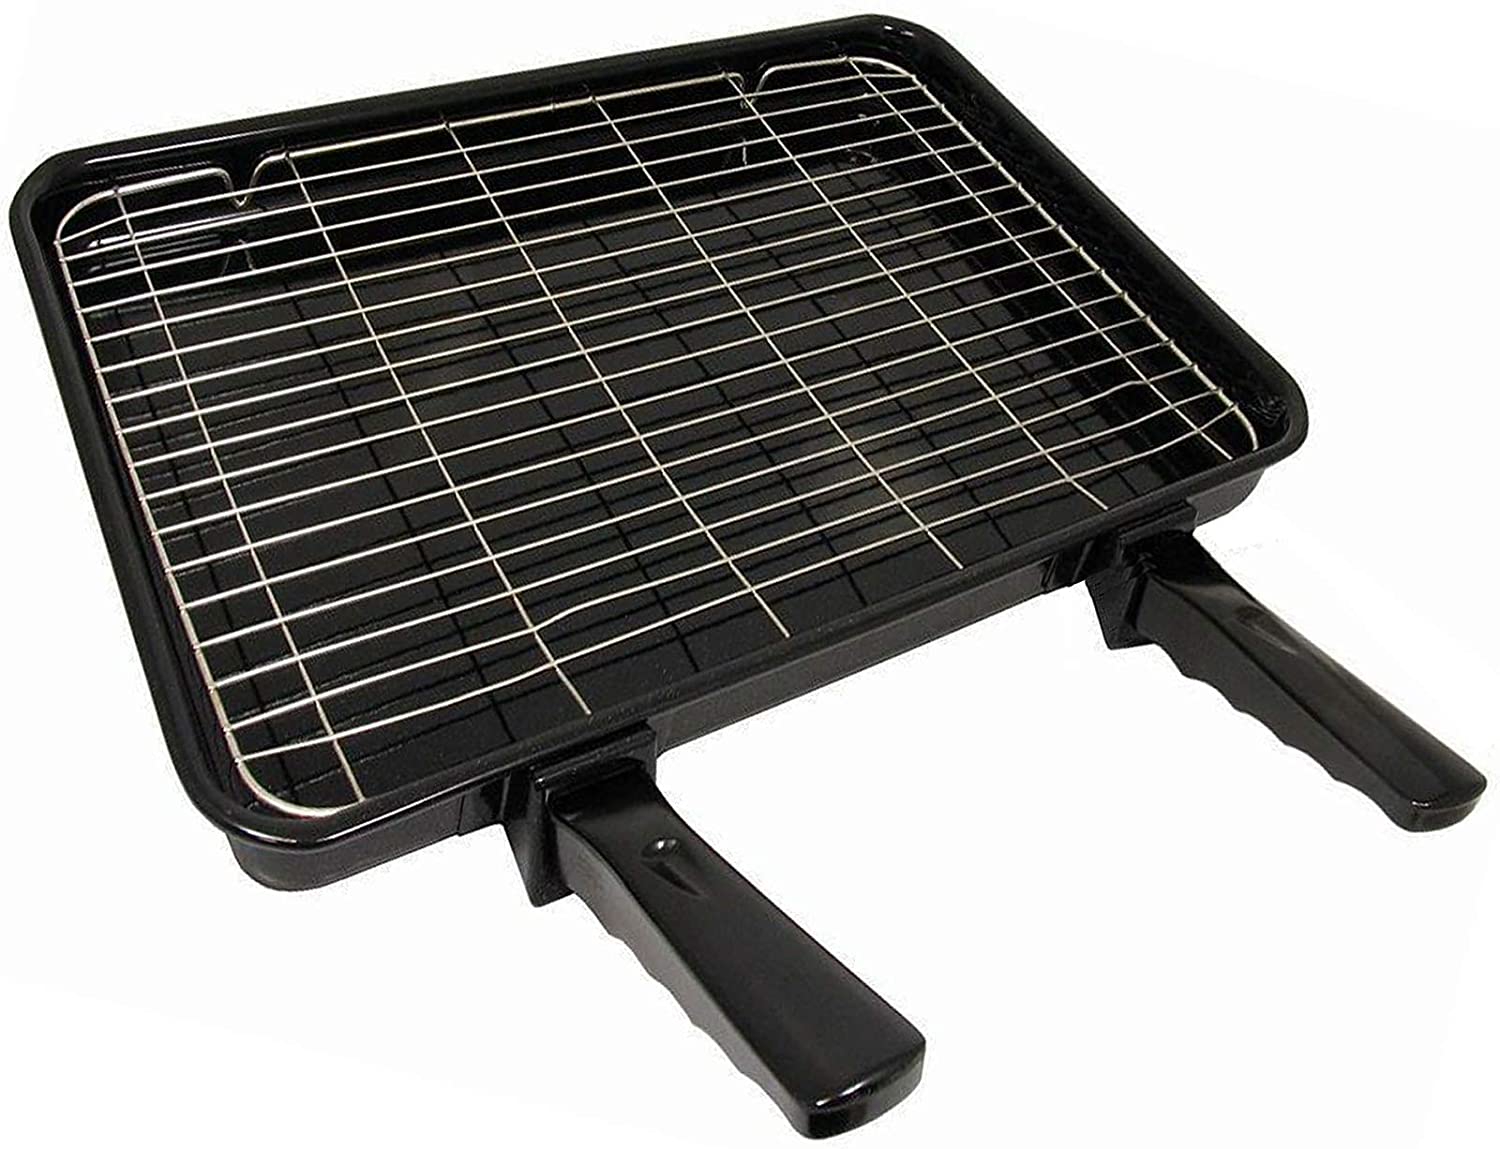 Medium Grill Pan, Rack & Dual Detachable Handles with Adjustable Shelf for HYGENA Oven Cookers